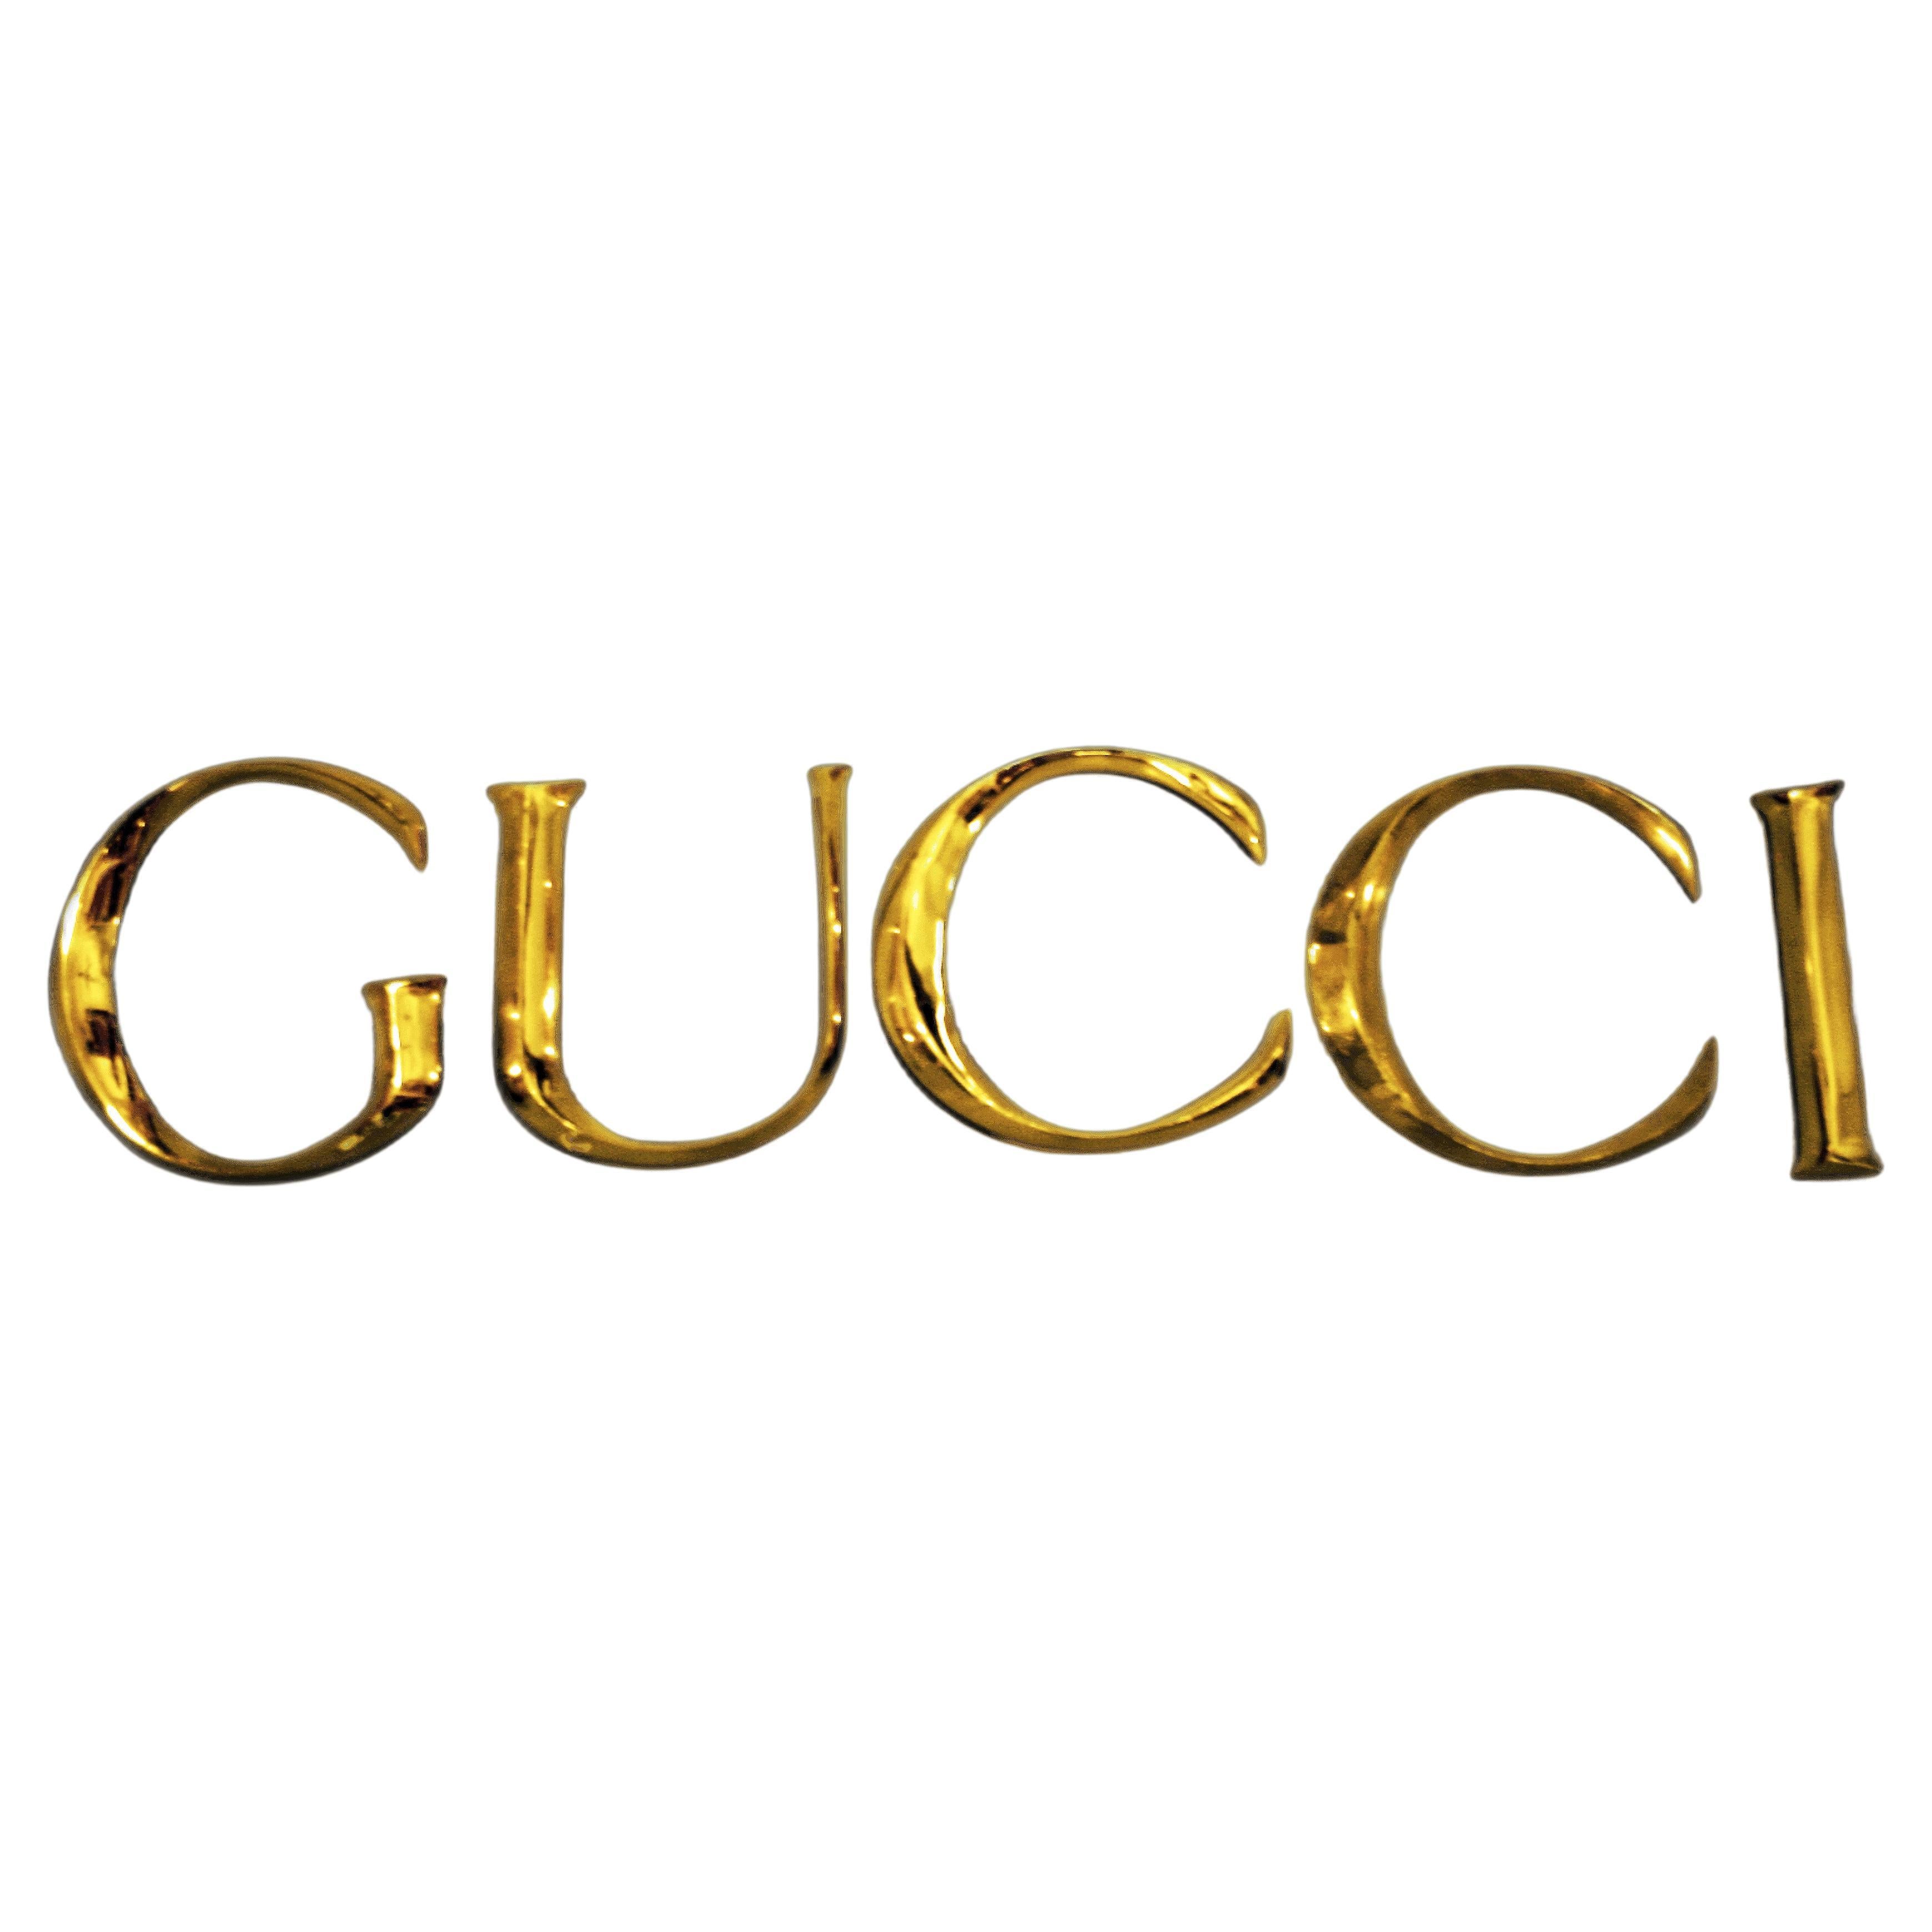 Late 20th Century Decorative Wall Ornament Gucci Letters Made in Golden Brass